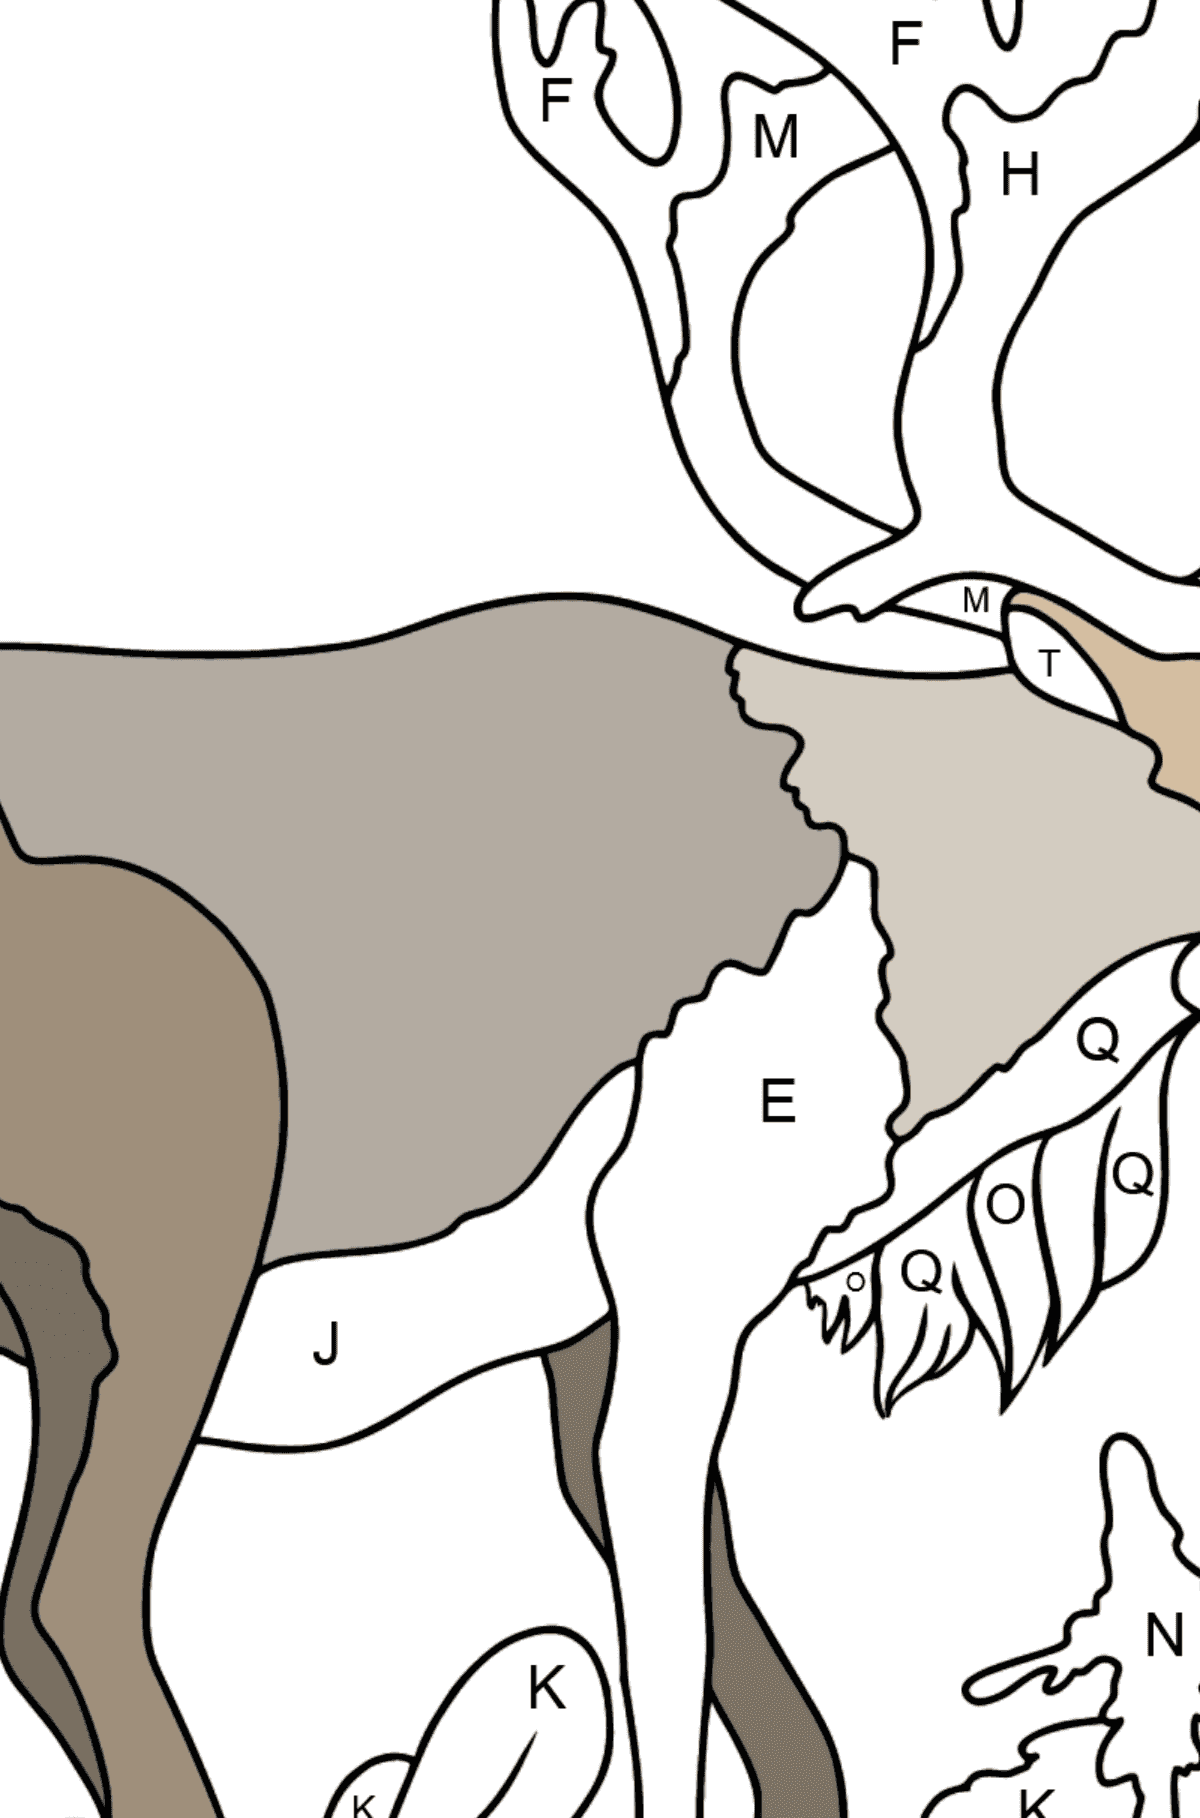 Coloring Page - A Noble Deer - Coloring by Letters for Kids